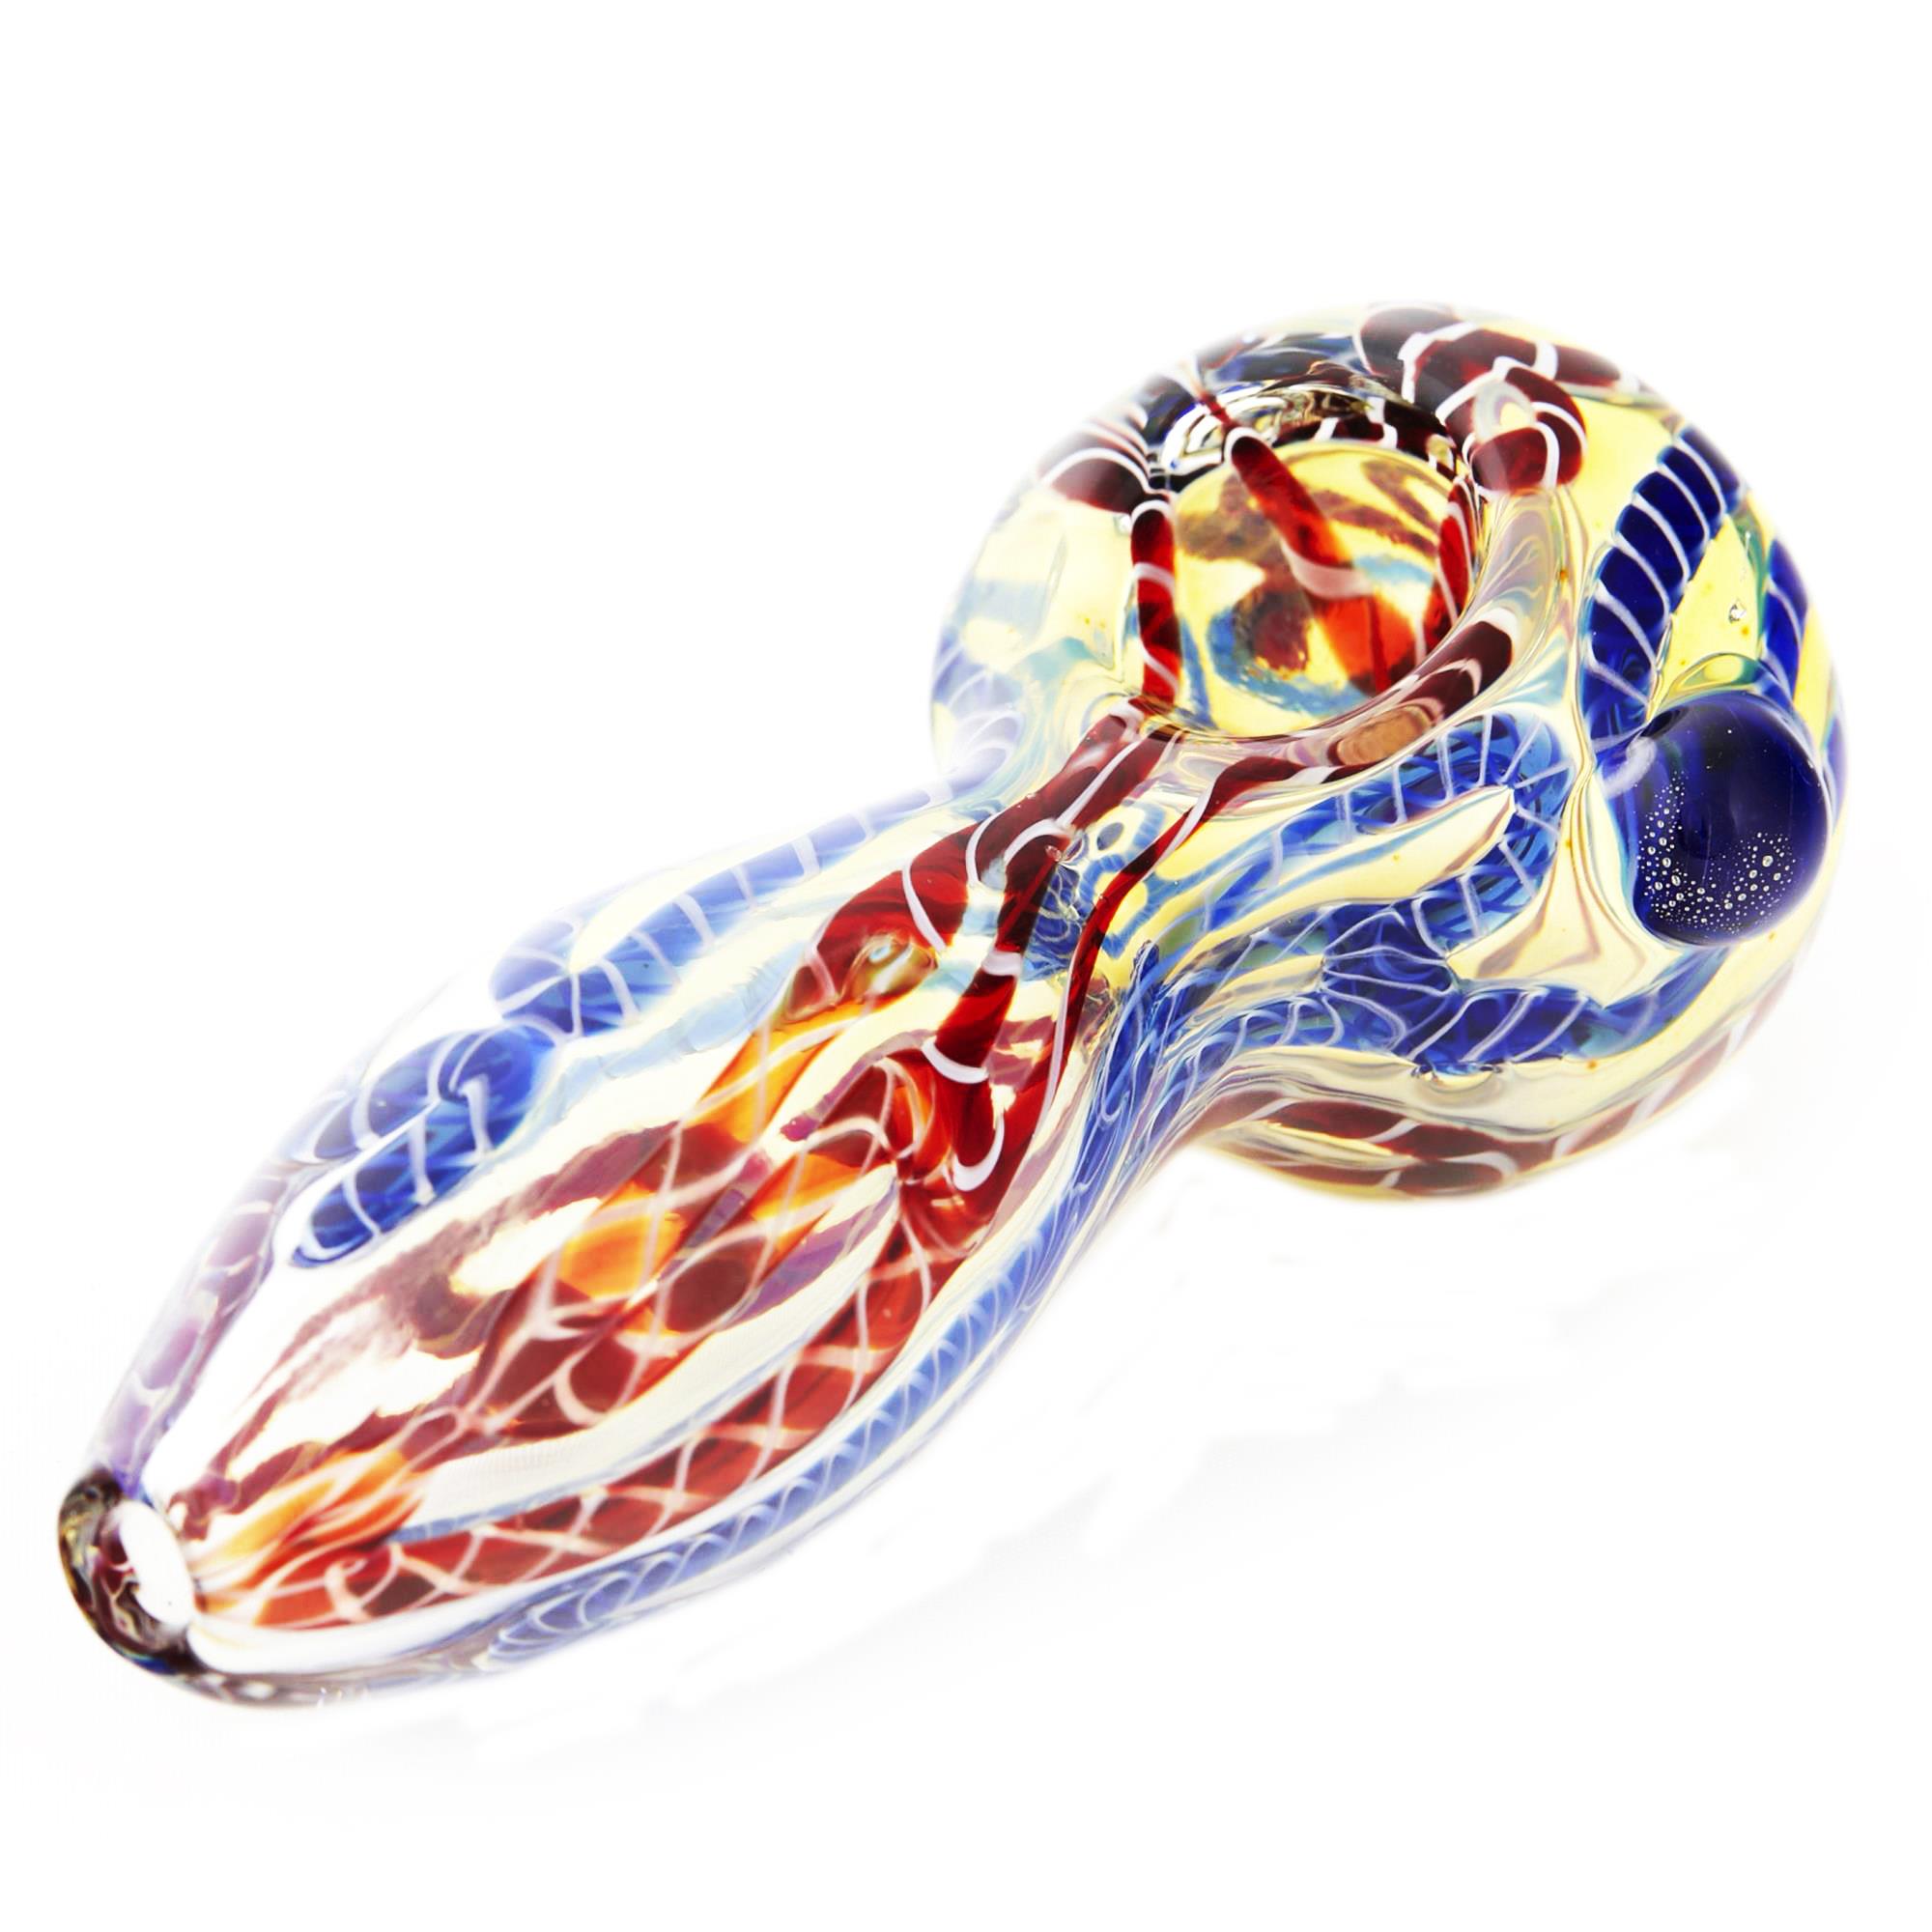 TWISTED ROPES SPOON PIPE